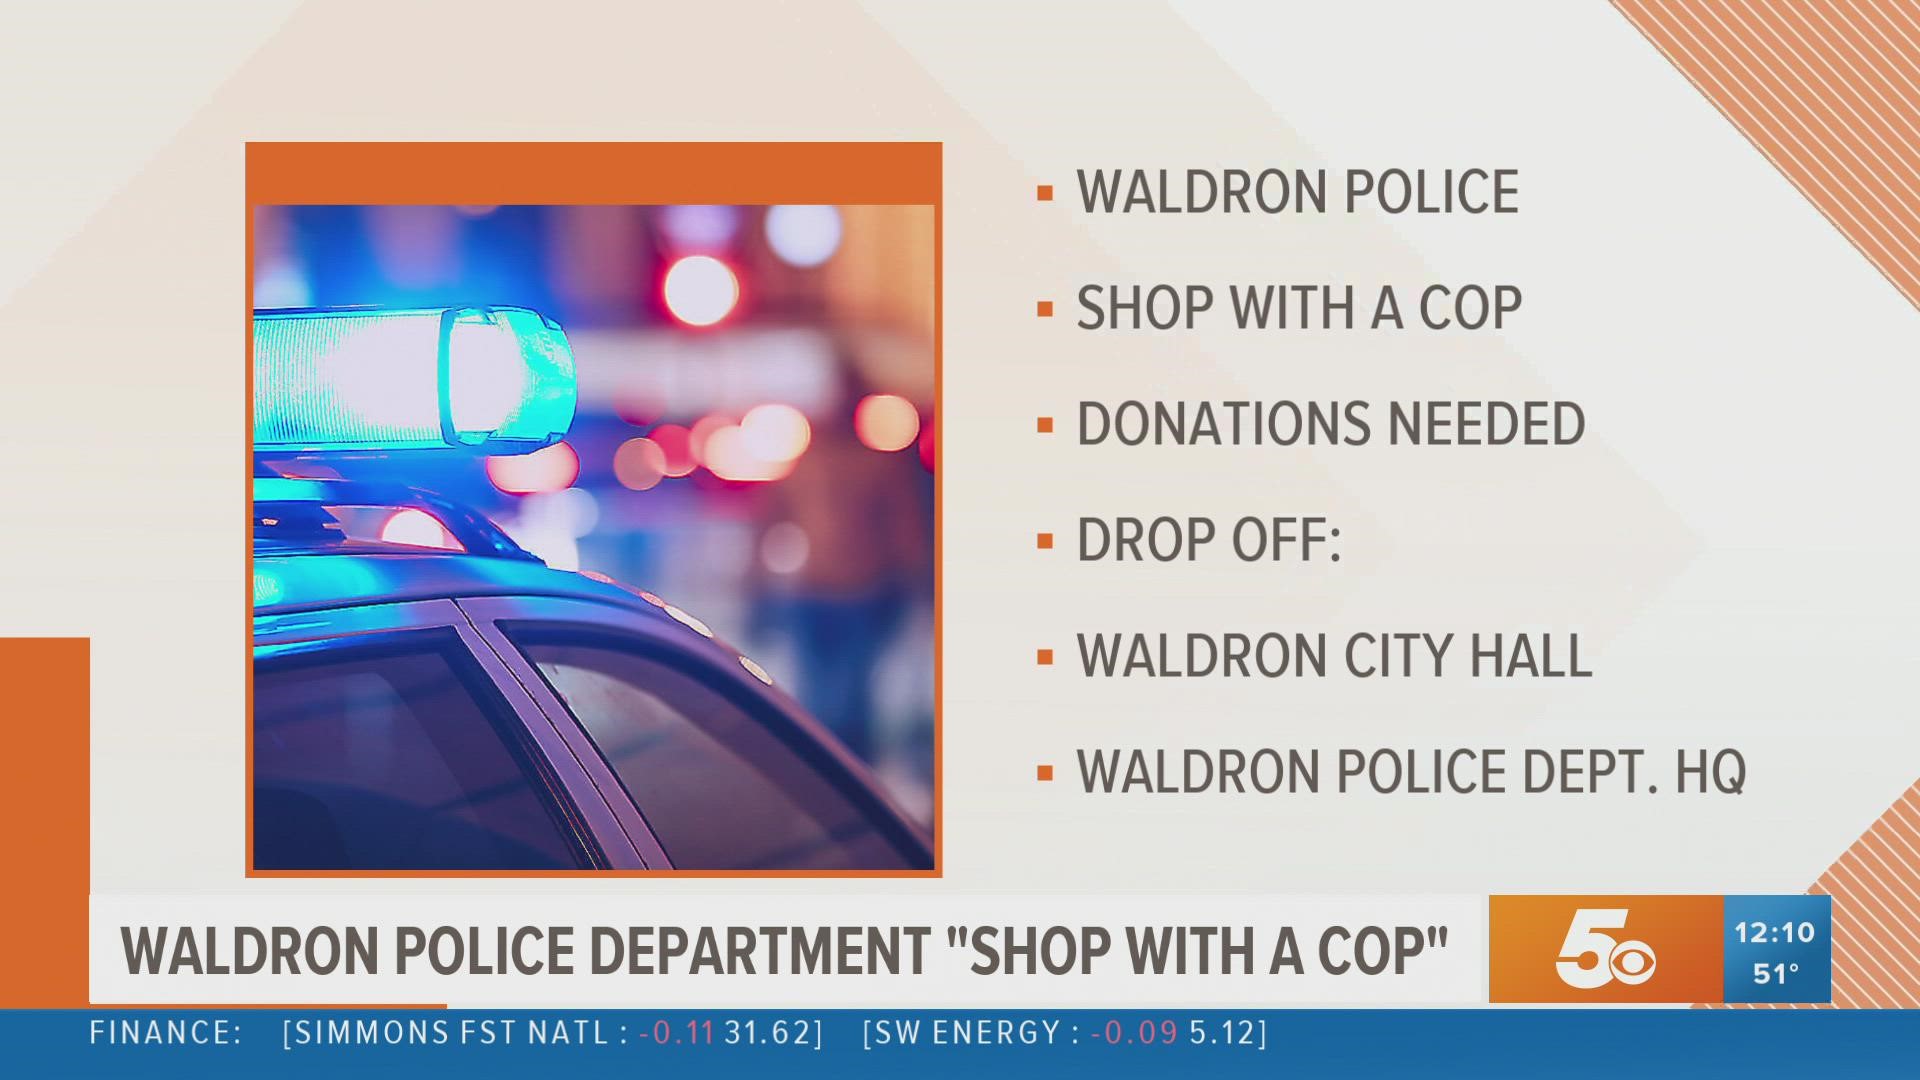 Donations to "Shop with a Cop" go toward helping local children have a Merry Christmas.